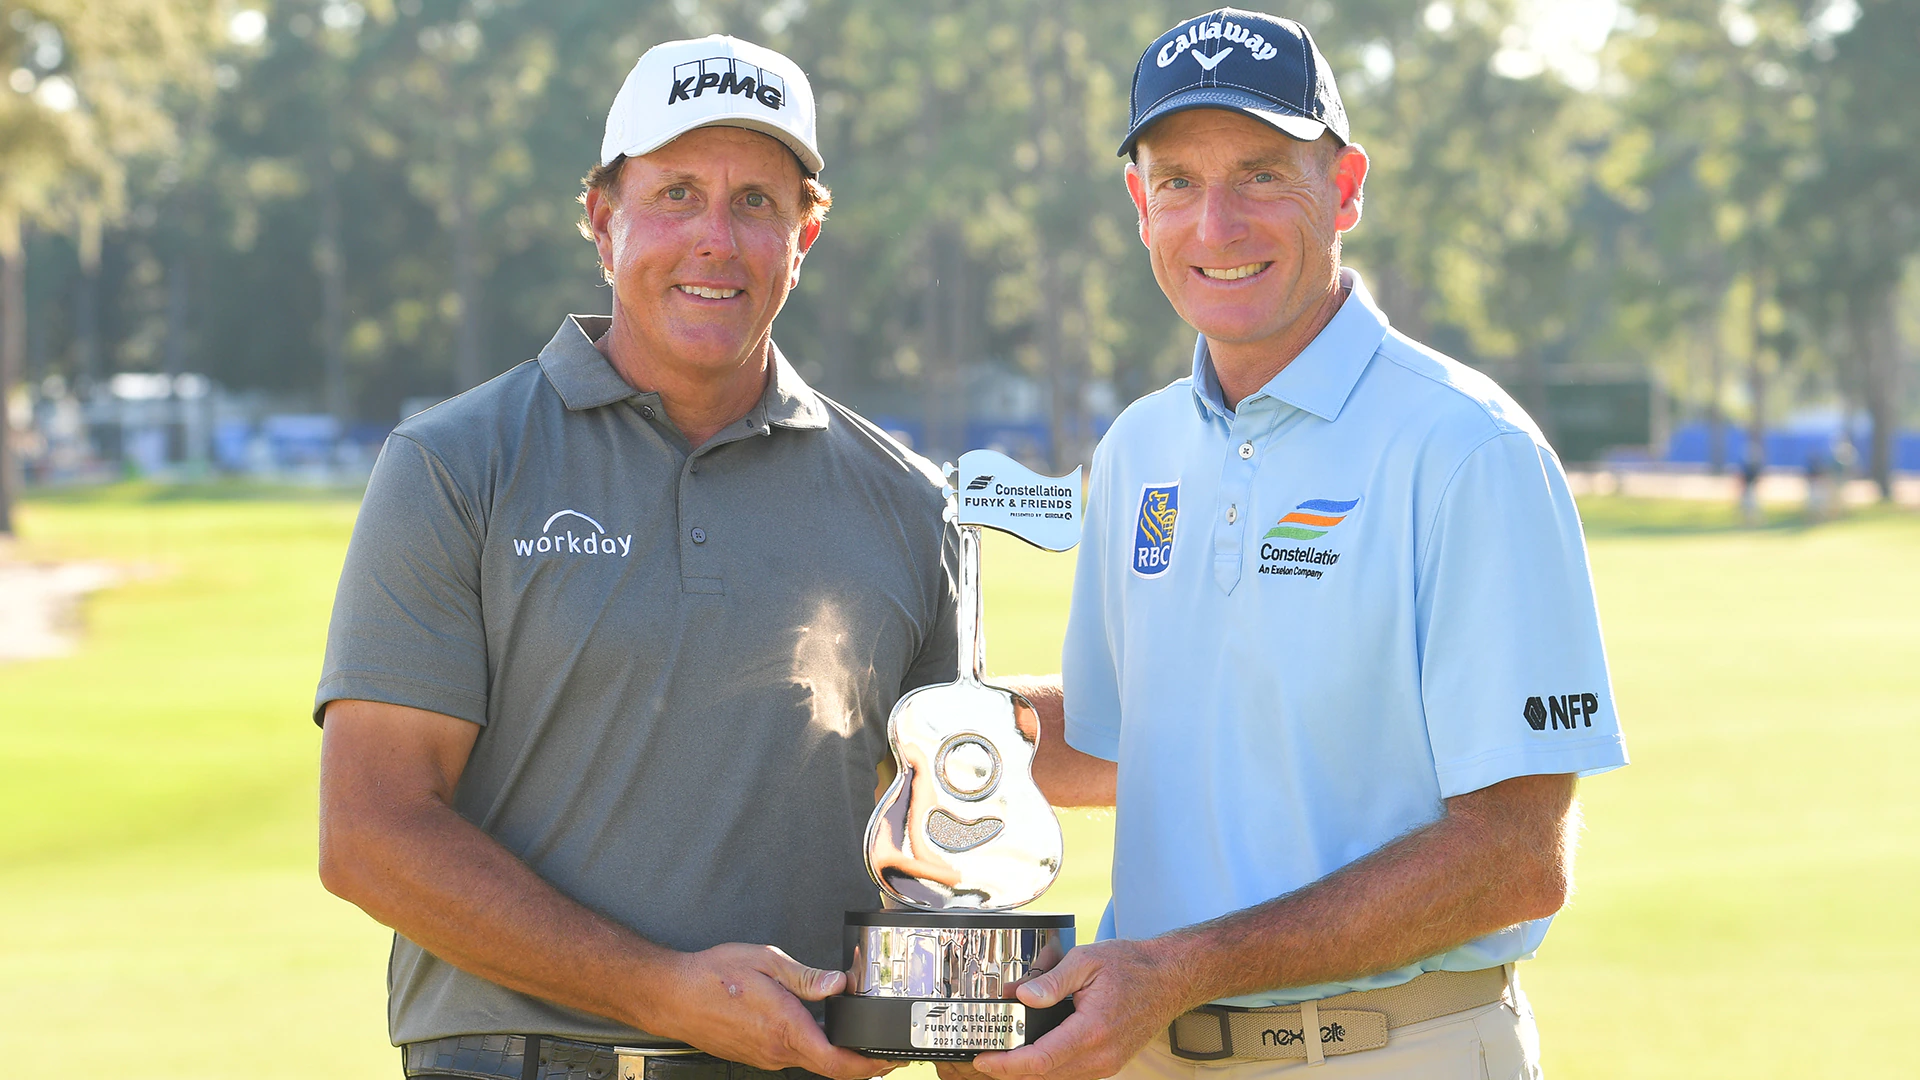 Best friend: Phil Mickelson wins Furyk & Friends for third Champs title